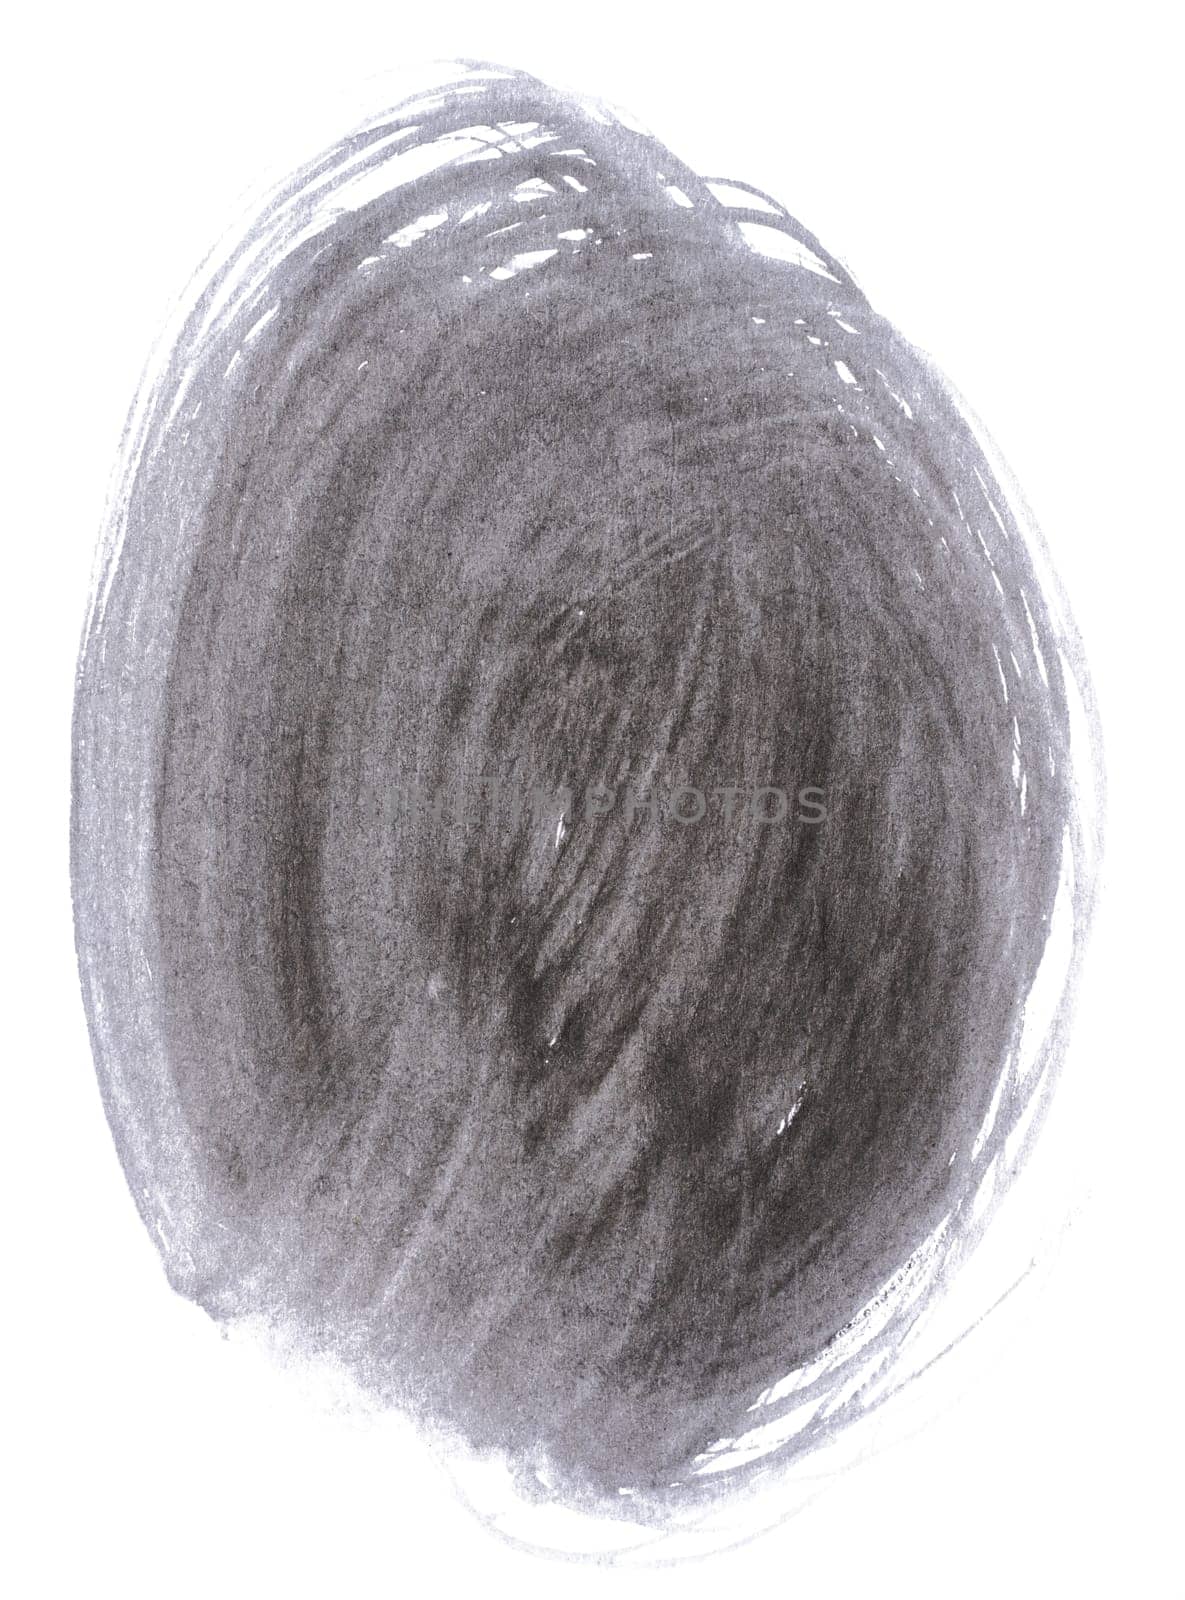 Drawn oval with black watercolor paint on a white background